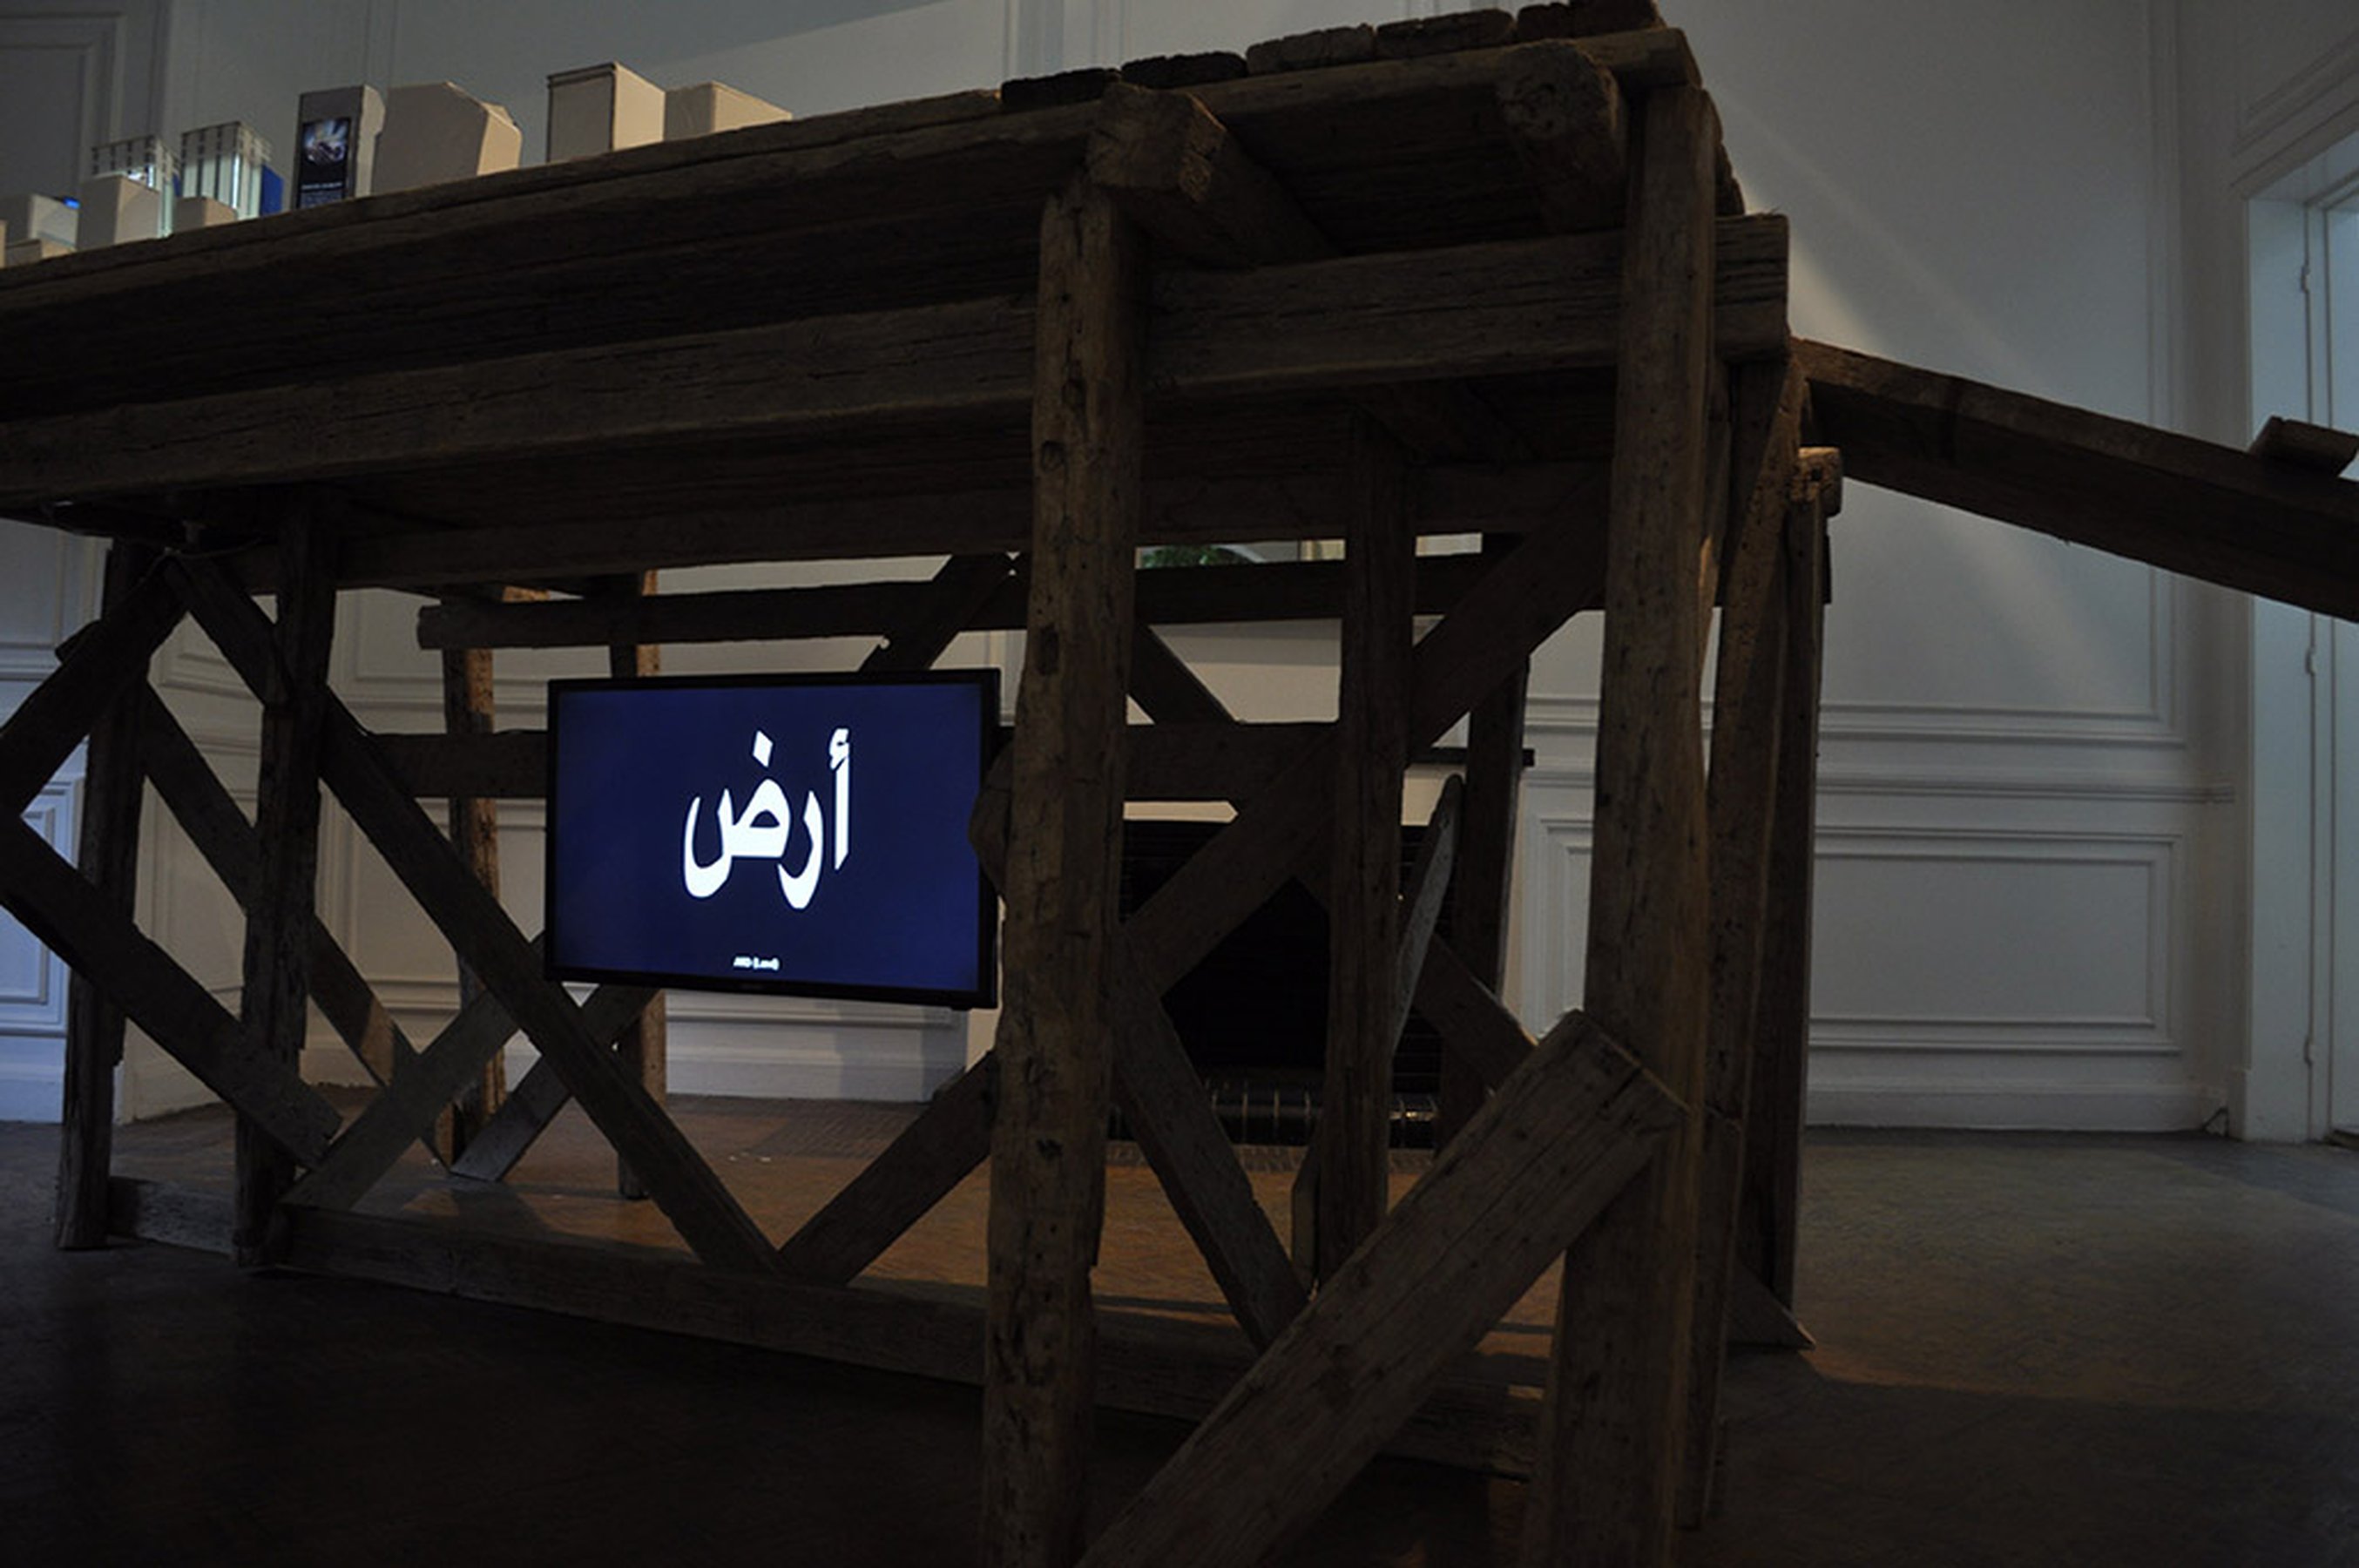 White Paper: the land, 2014 architectural model and video 175 × 265 × 125 cm; installation view at Casco, Beirut, 2014